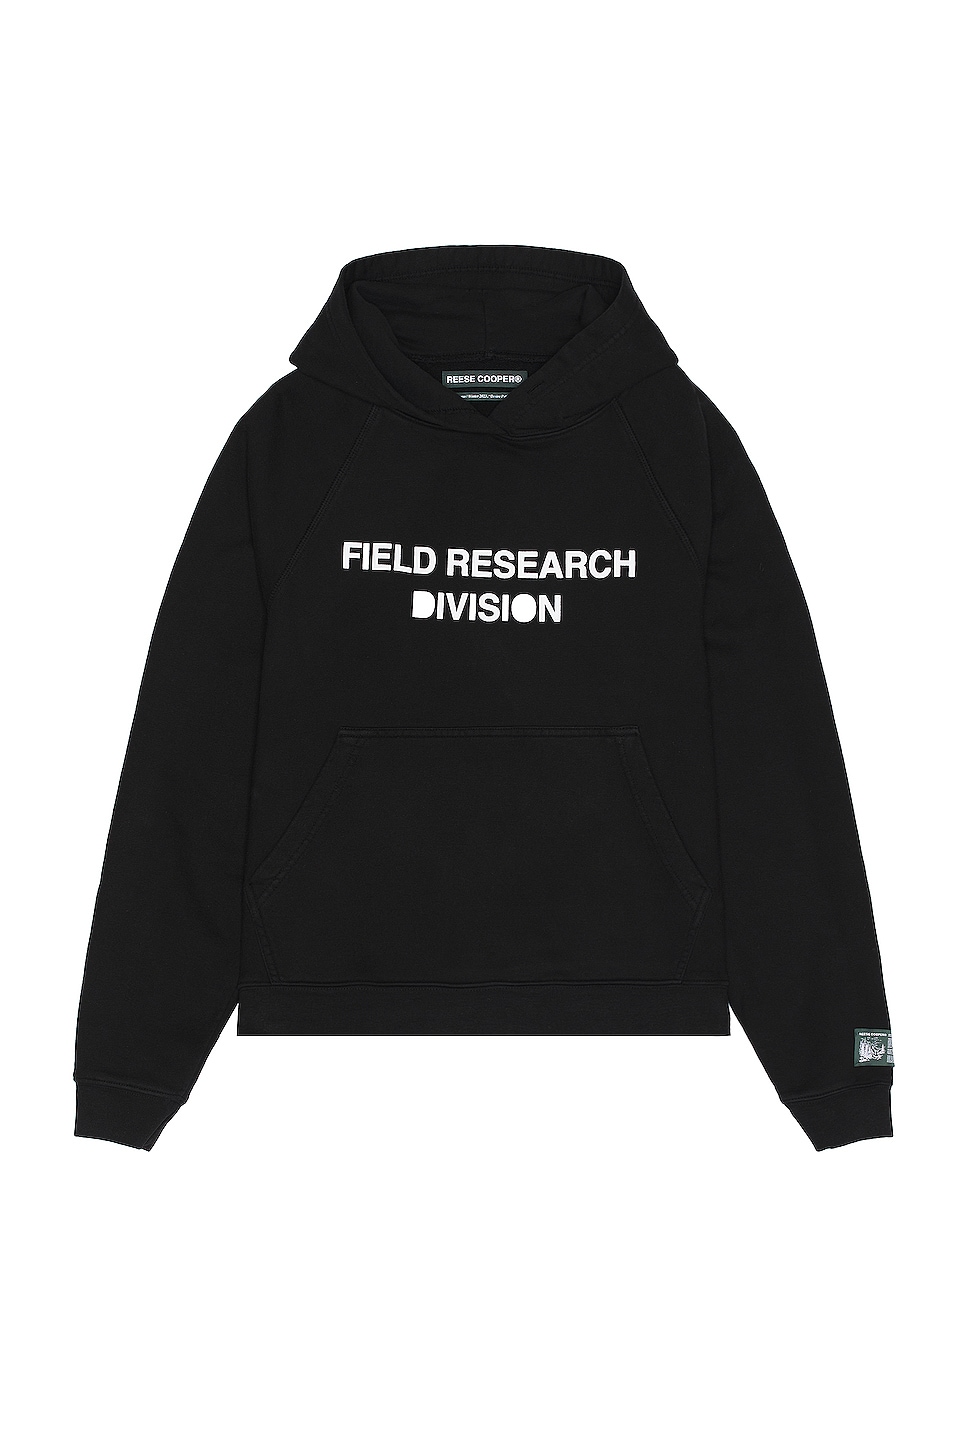 Field Research Division Hooded Sweatshirt in Black